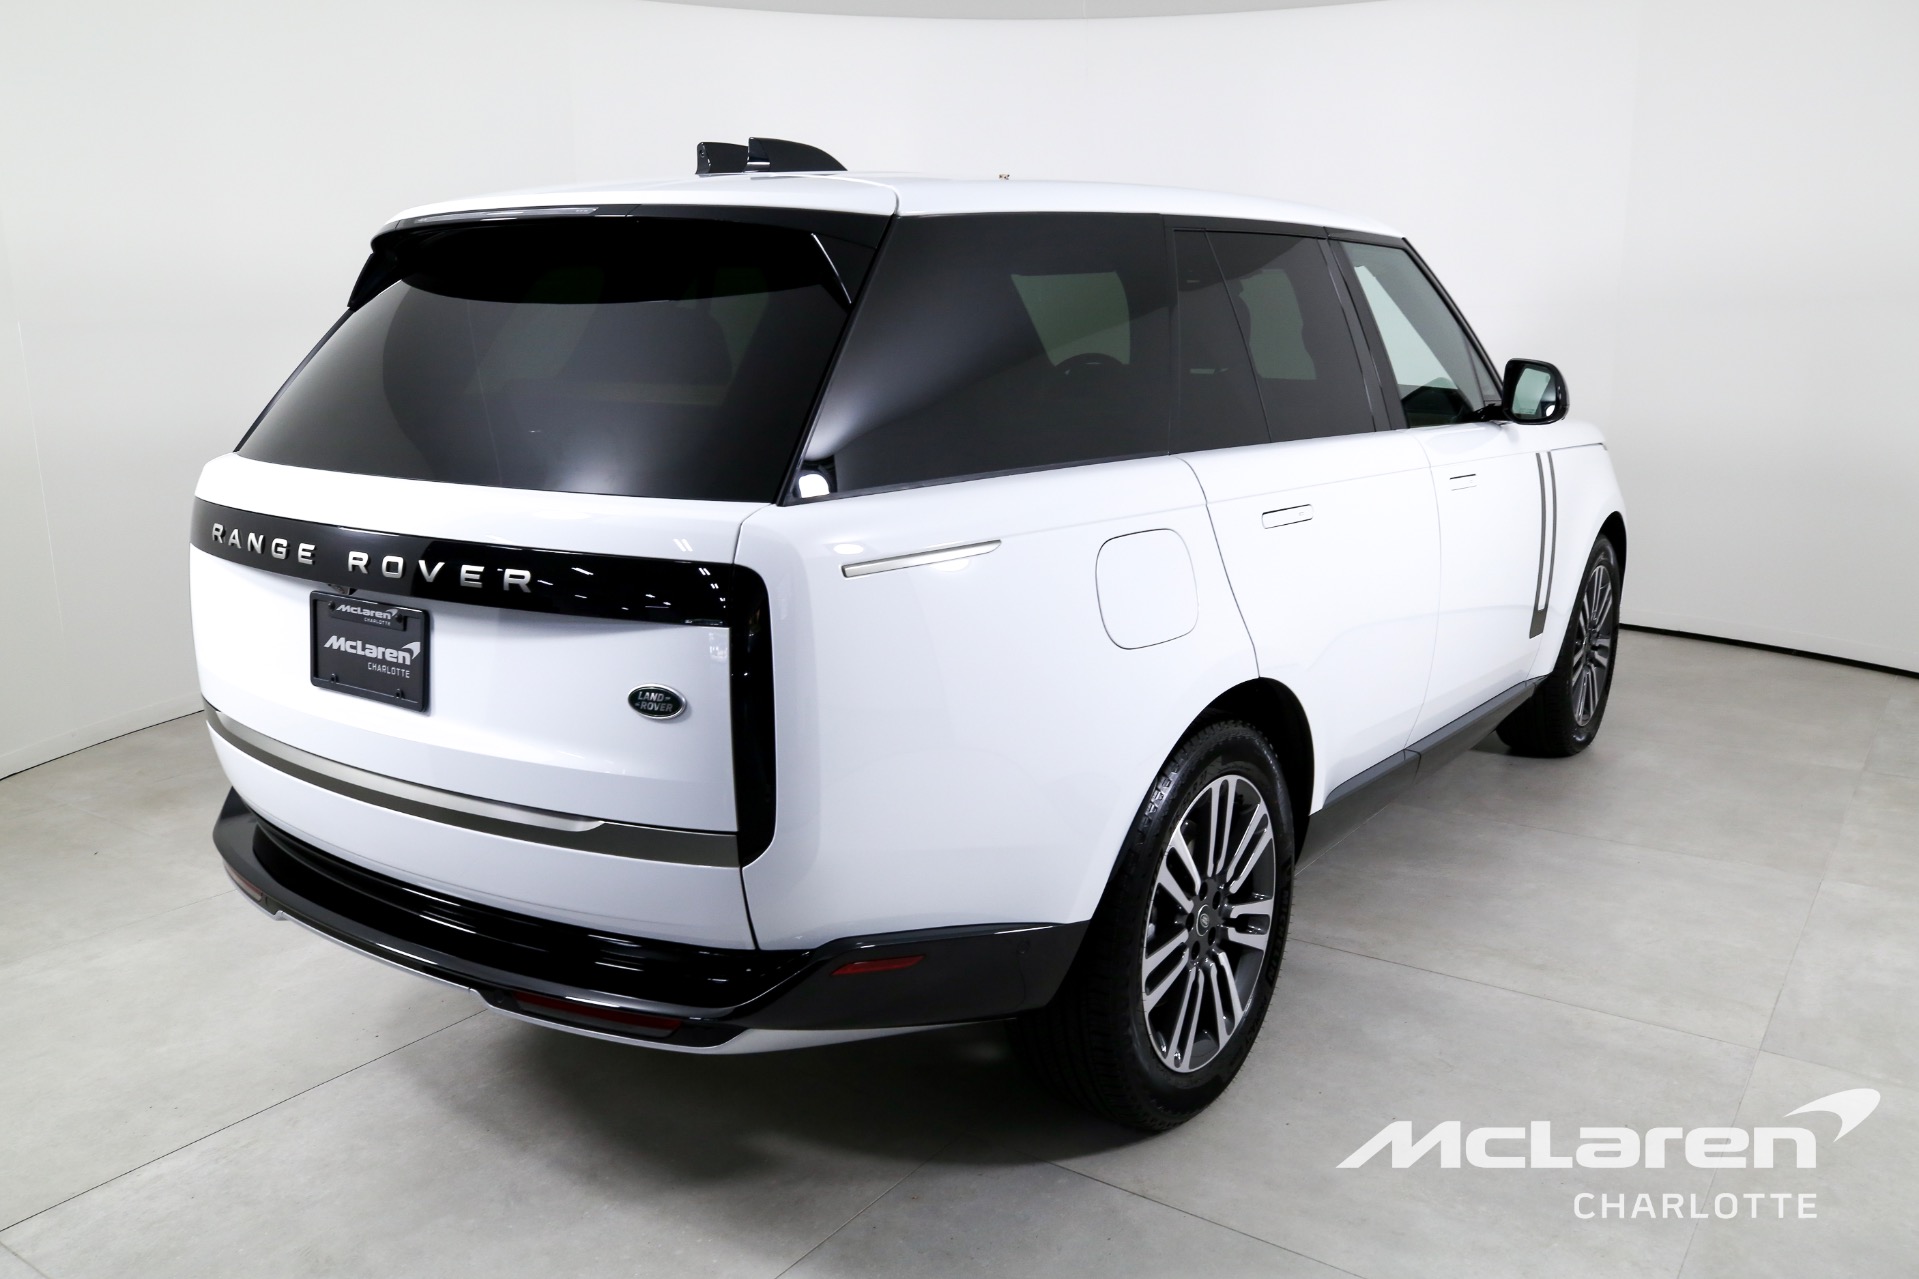 New Land Rover SUVs For Sale in Charlotte